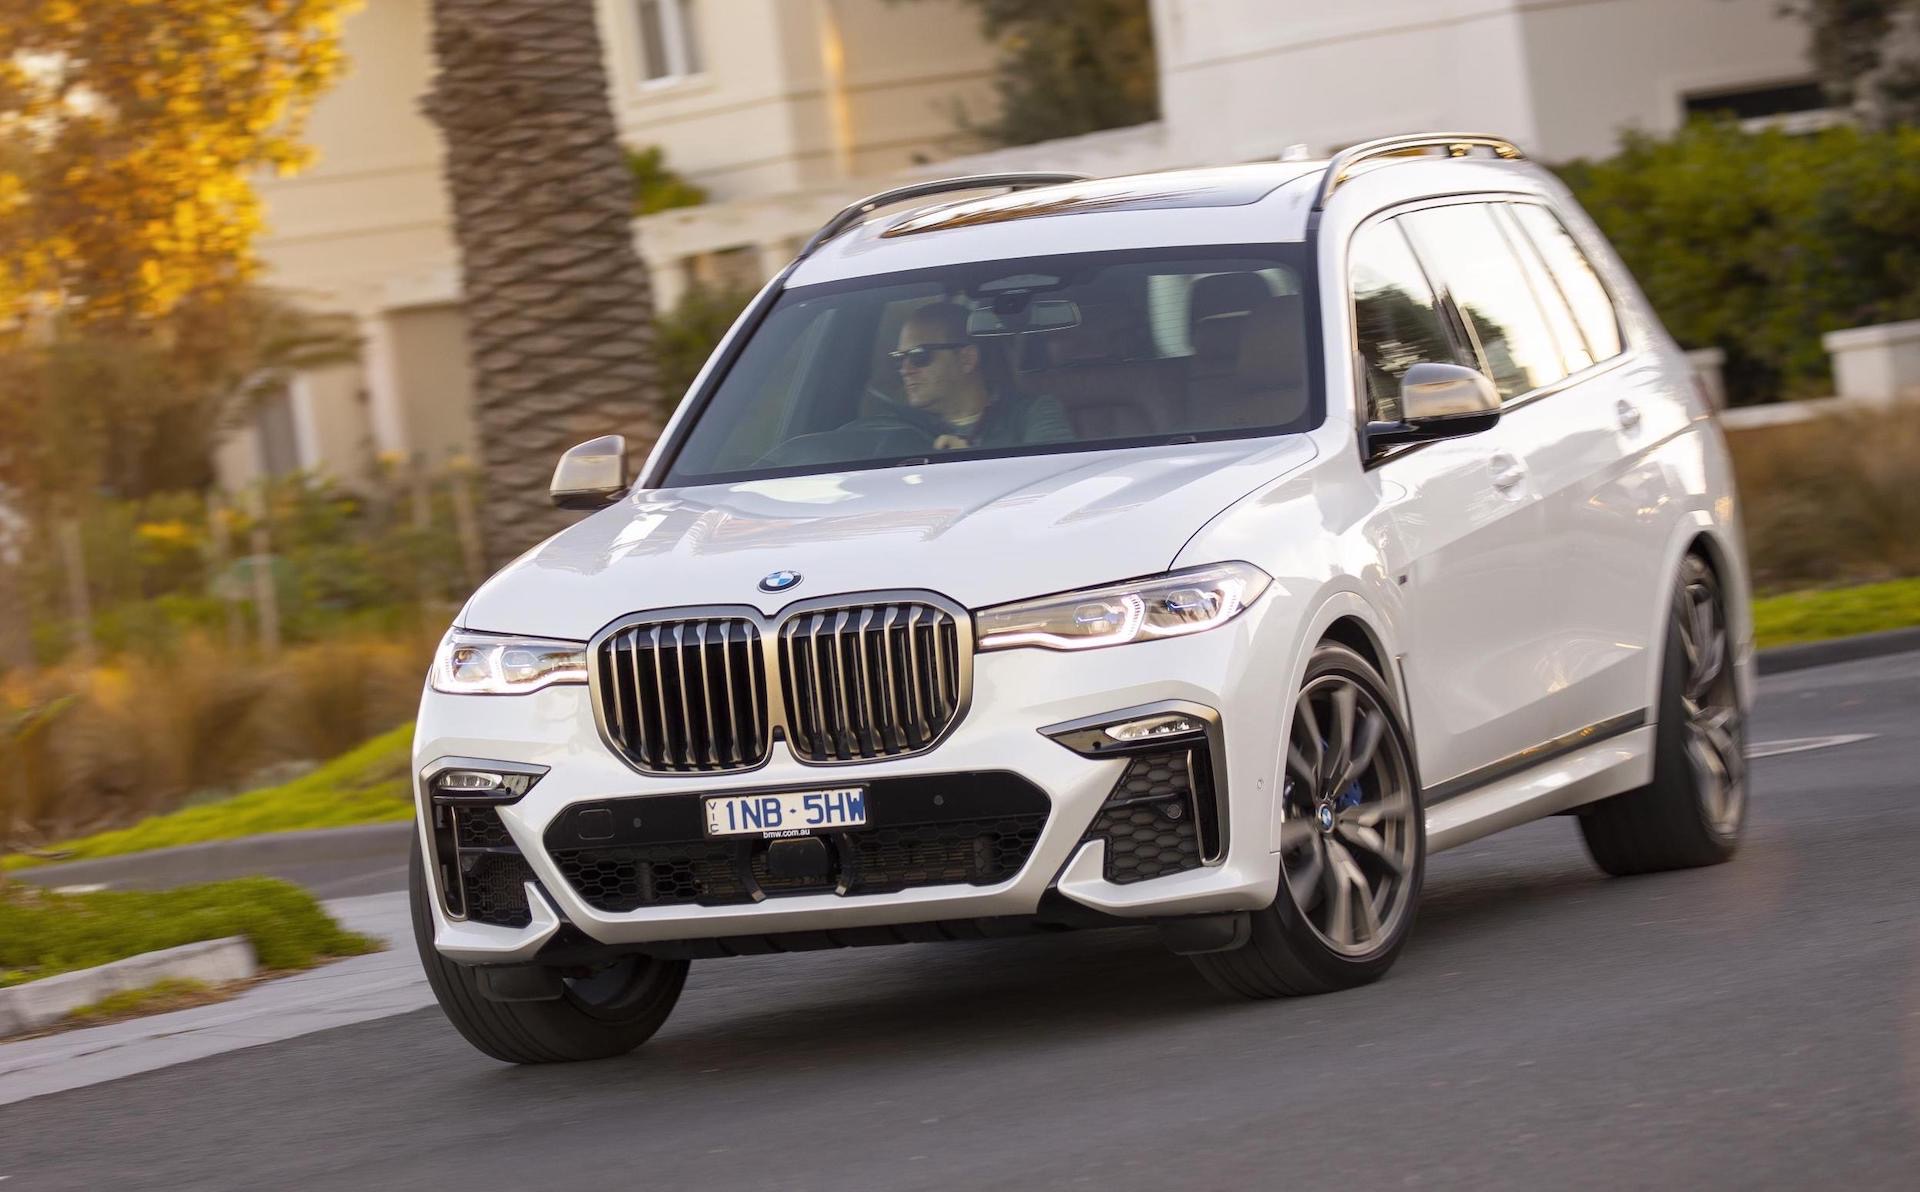 Large luxury SUV sales continue to grow in Australia